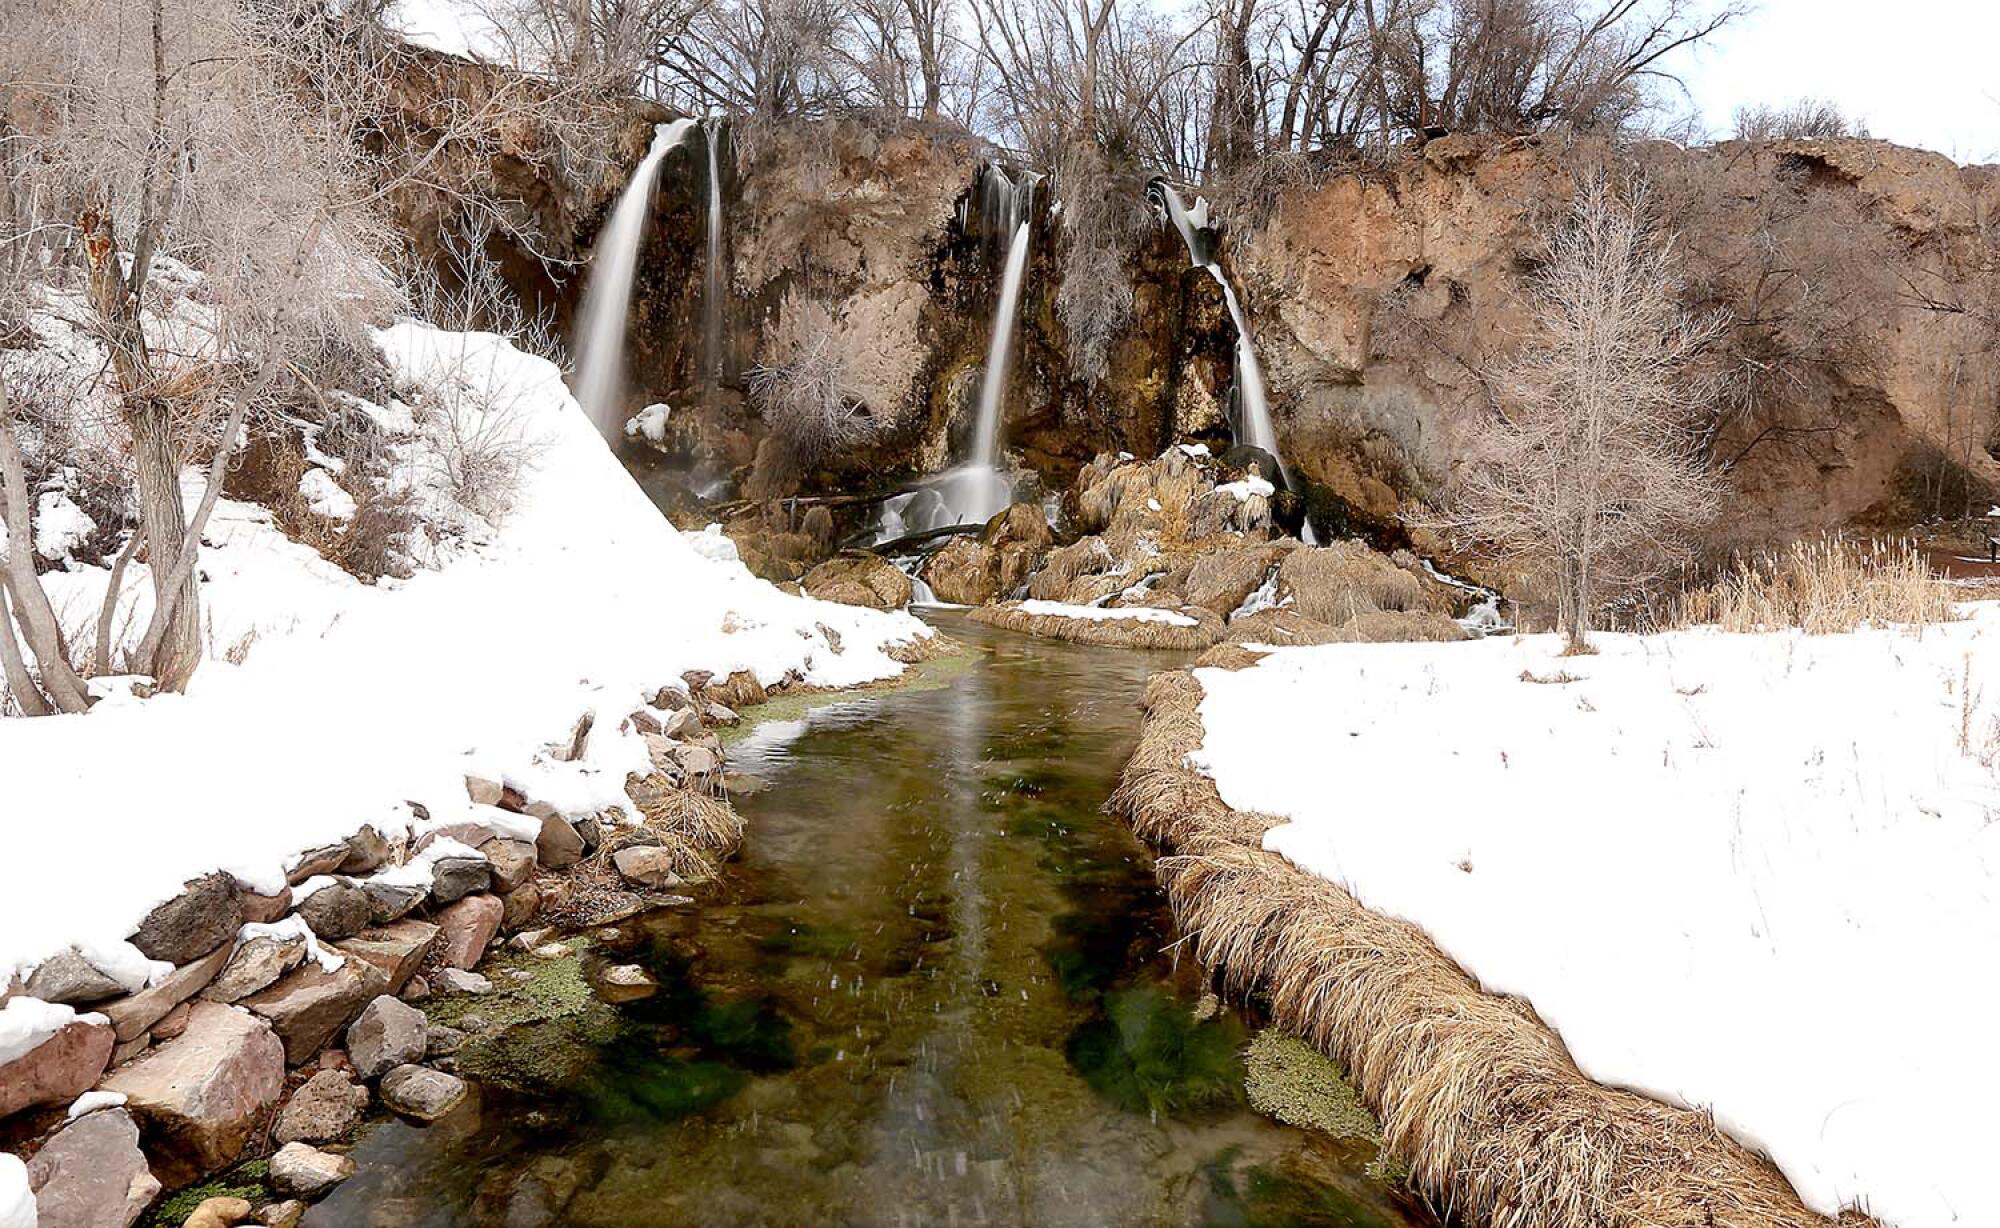 Rifle Falls sets a wintry scene near the community of Rifle, Colo.